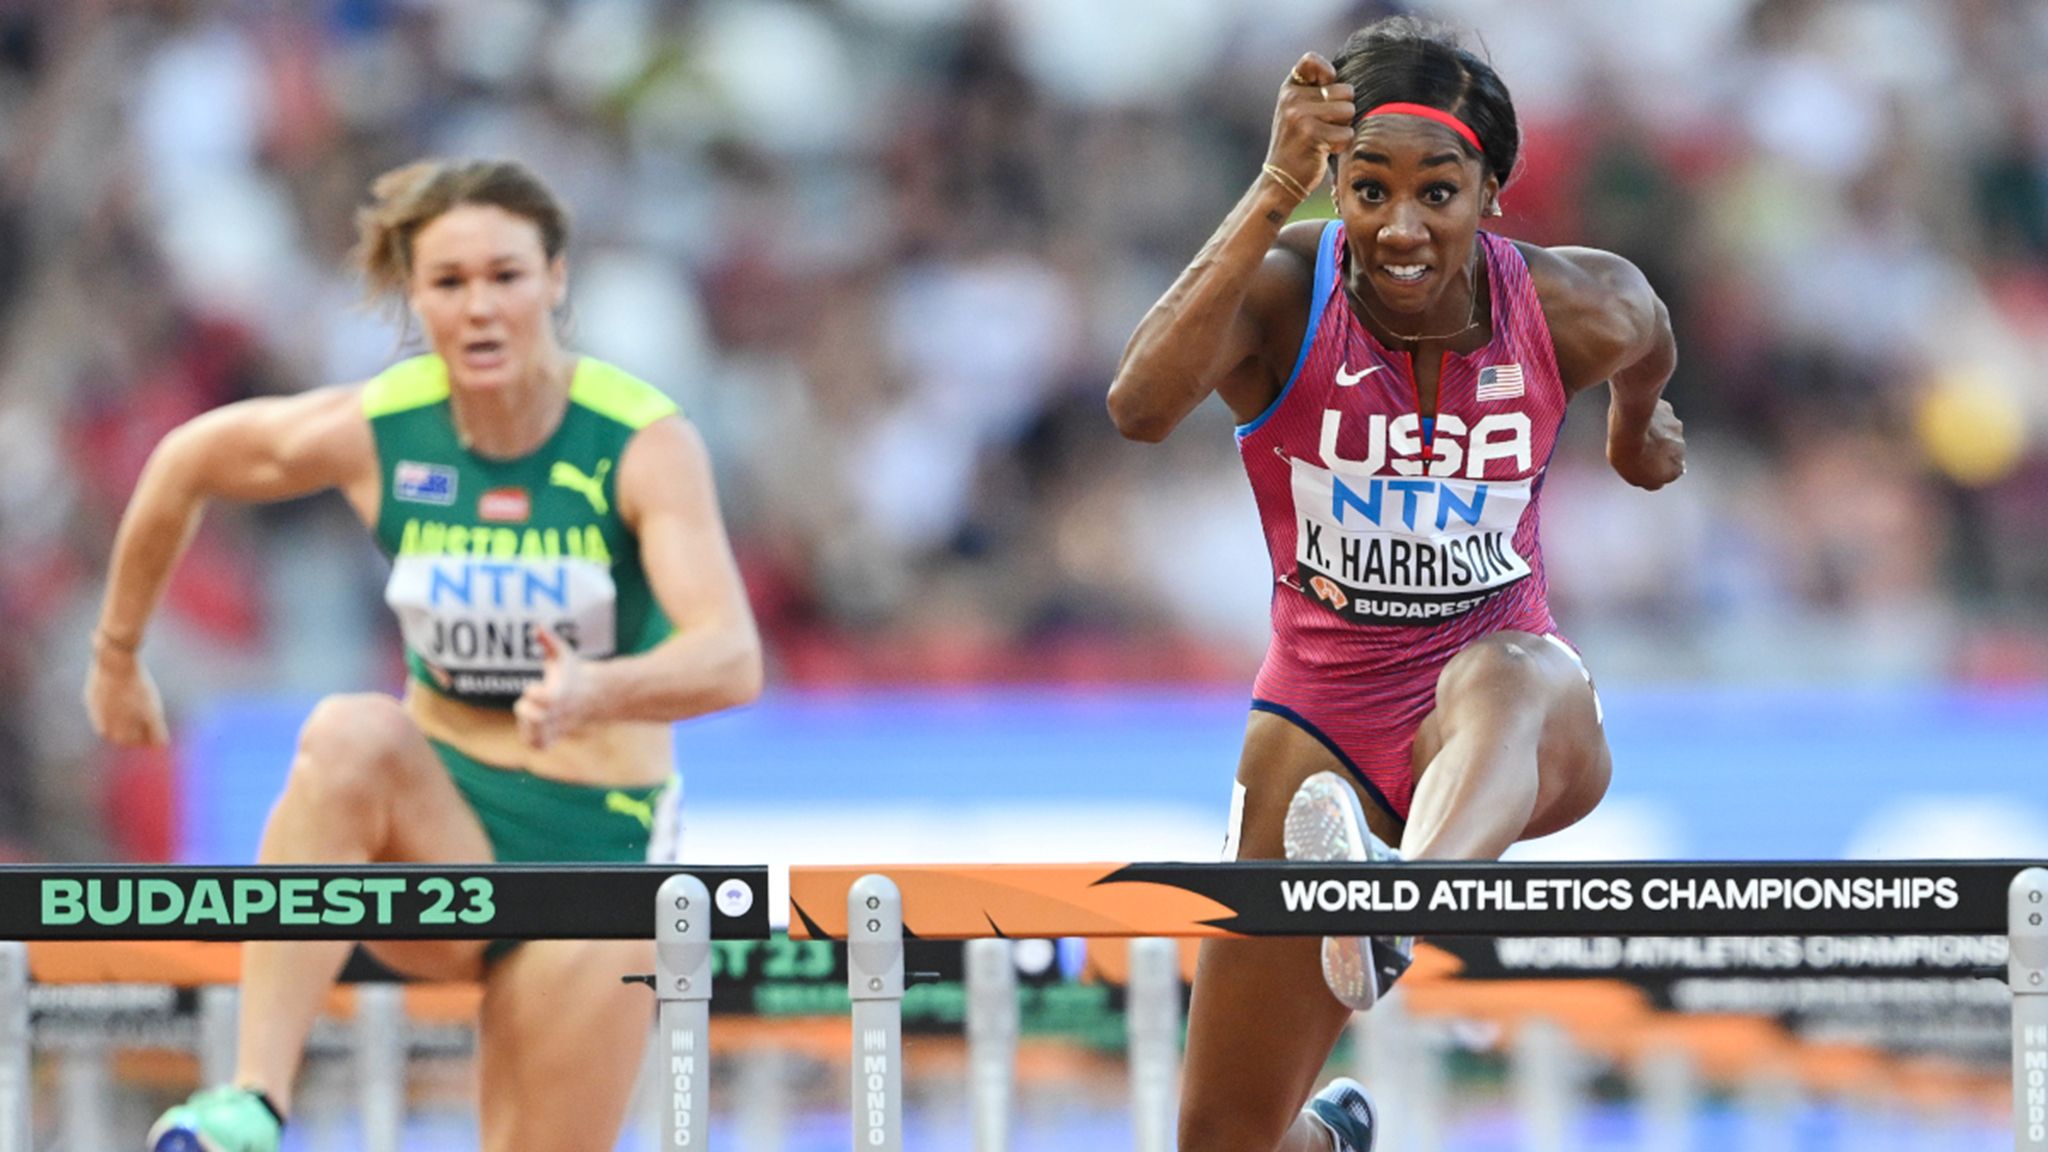 Keni Harrison cruises into 100m Hurdles final, favourite for world title in Budapest